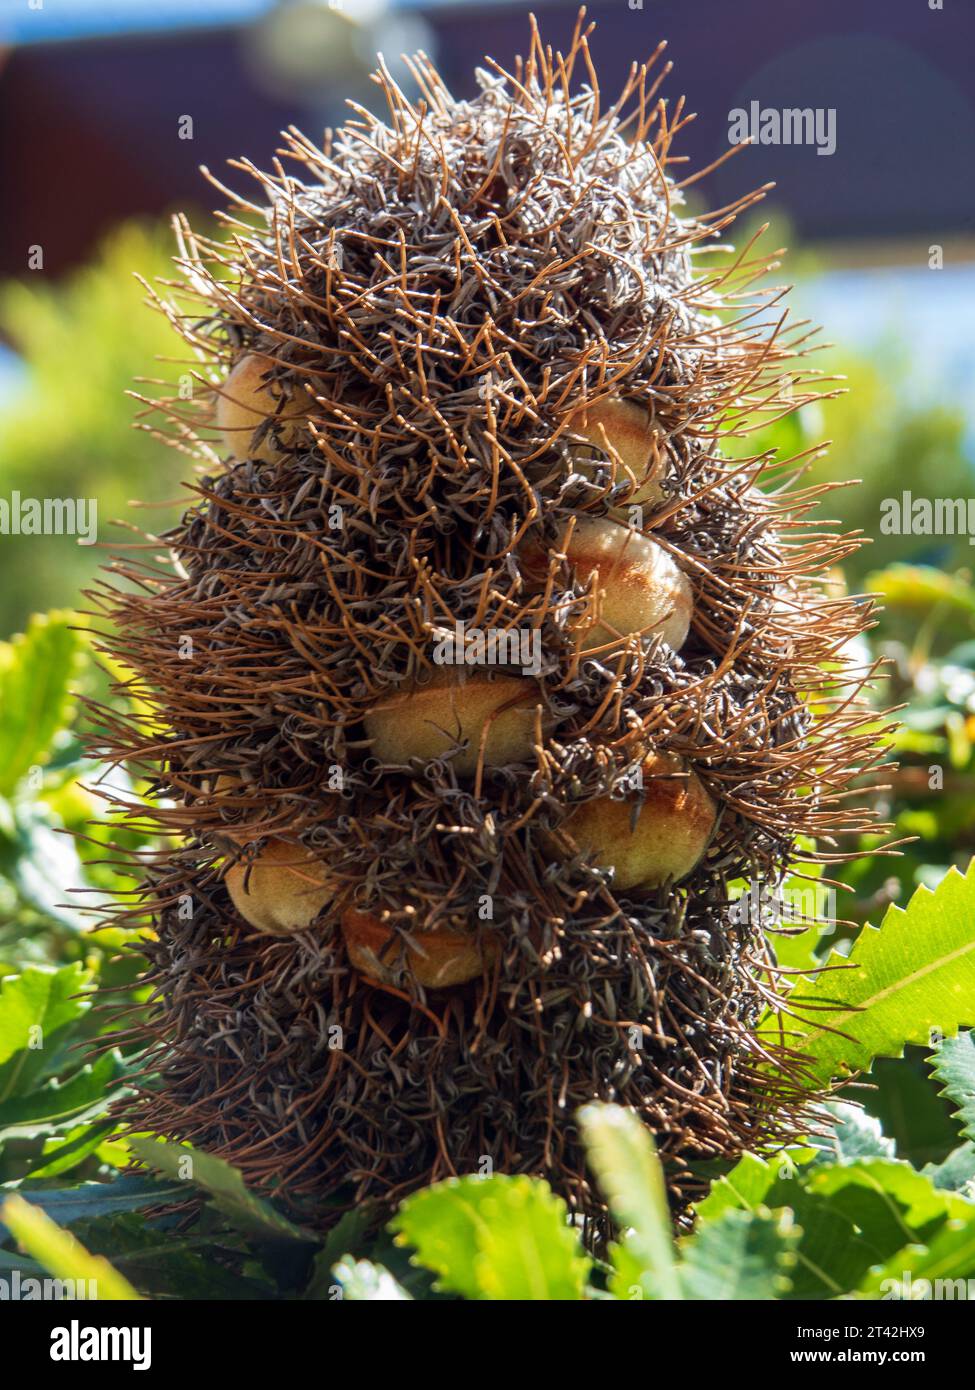 Dried out brown Banksia flower spikes with seed pods Stock Photo